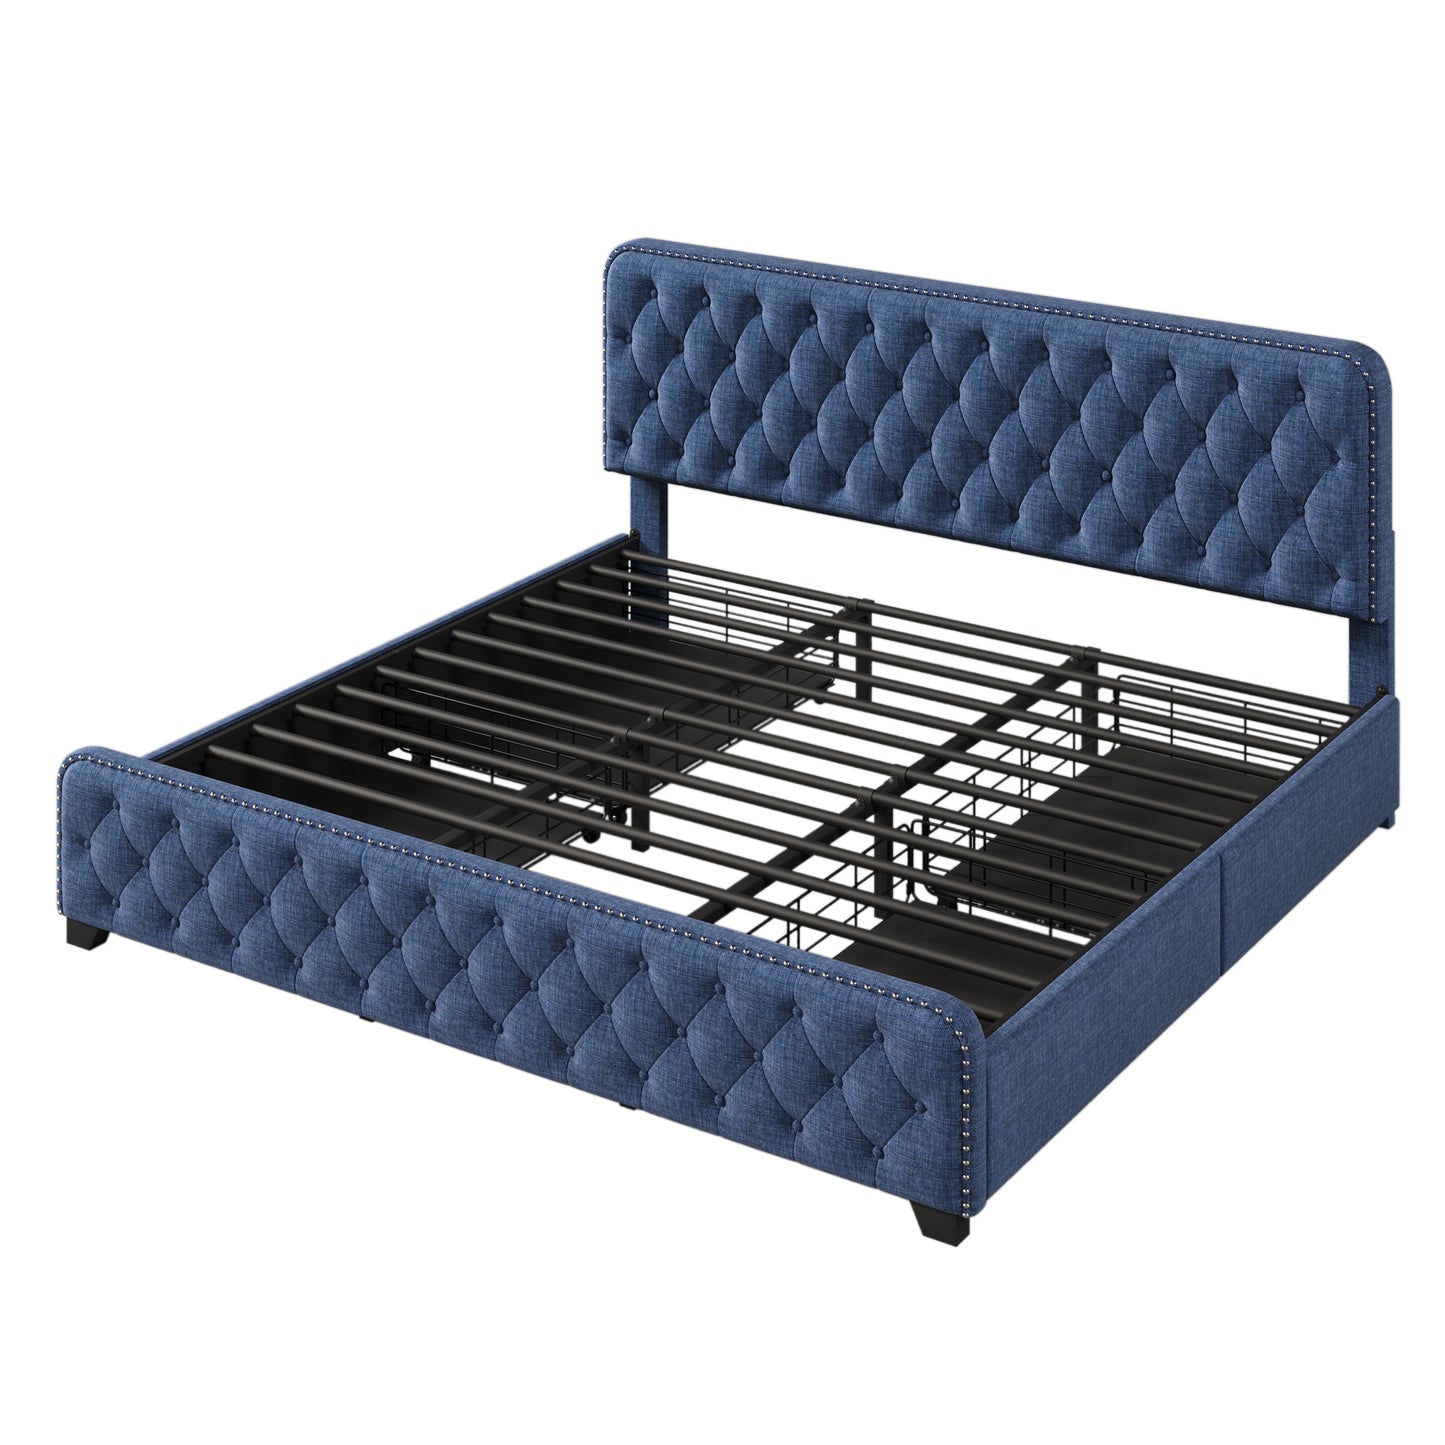 Upholstered Platform Bed Frame with Four Drawers, Button Tufted Headboard and Footboard Sturdy Metal Support, No Box Spring Required, Blue, King